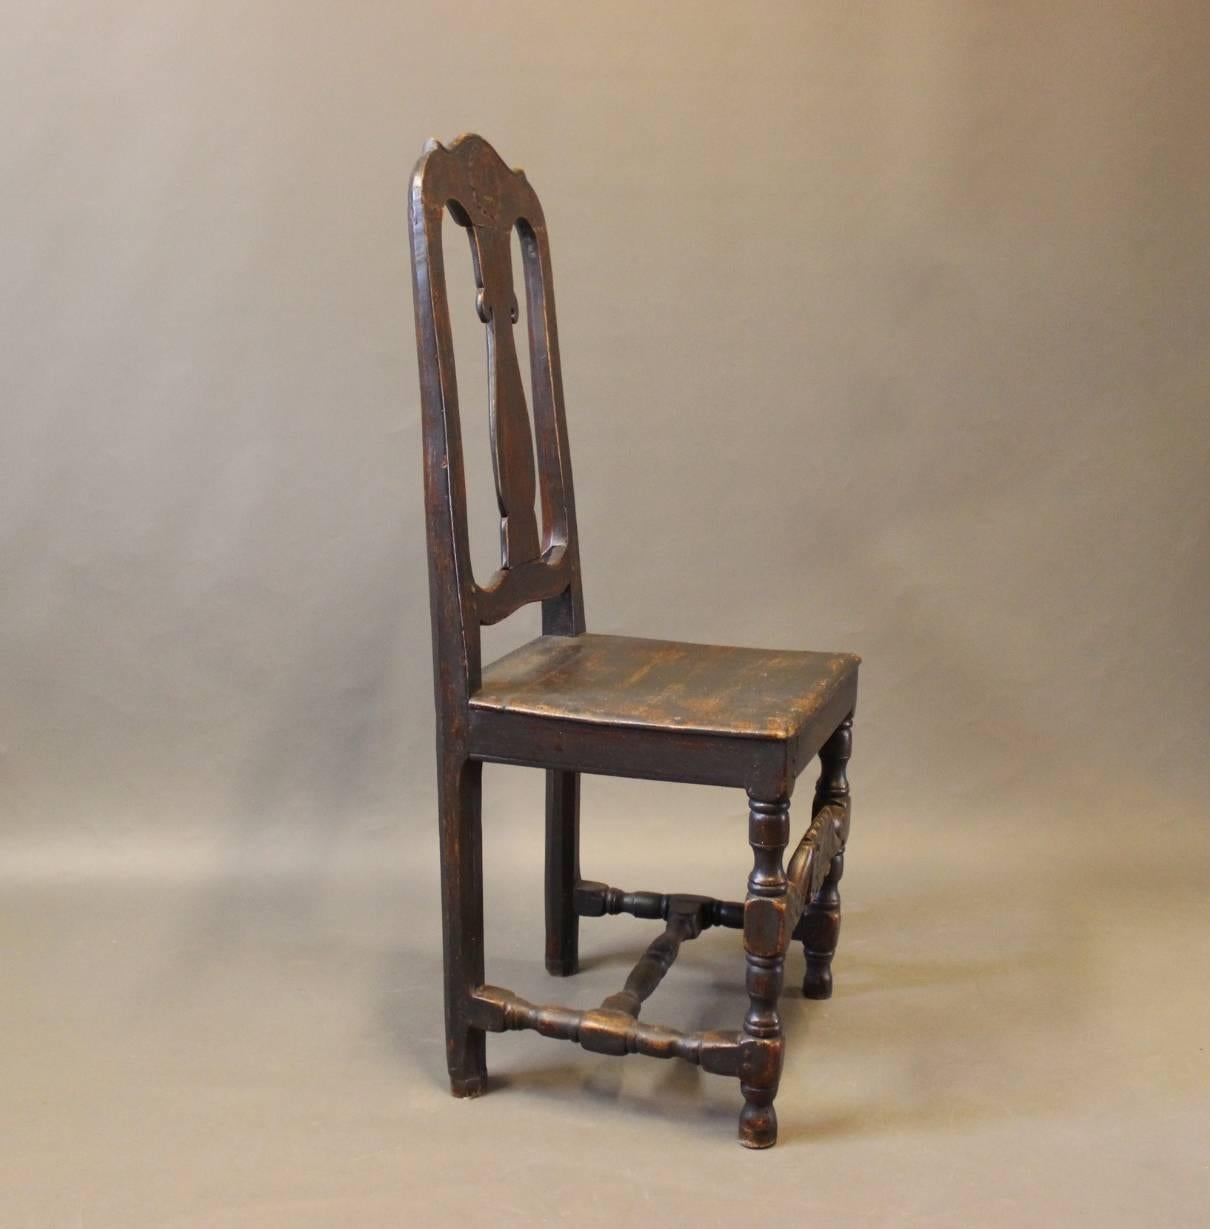 Baroque chair of painted wood, circa 1860s. The chair is in great antique condition.